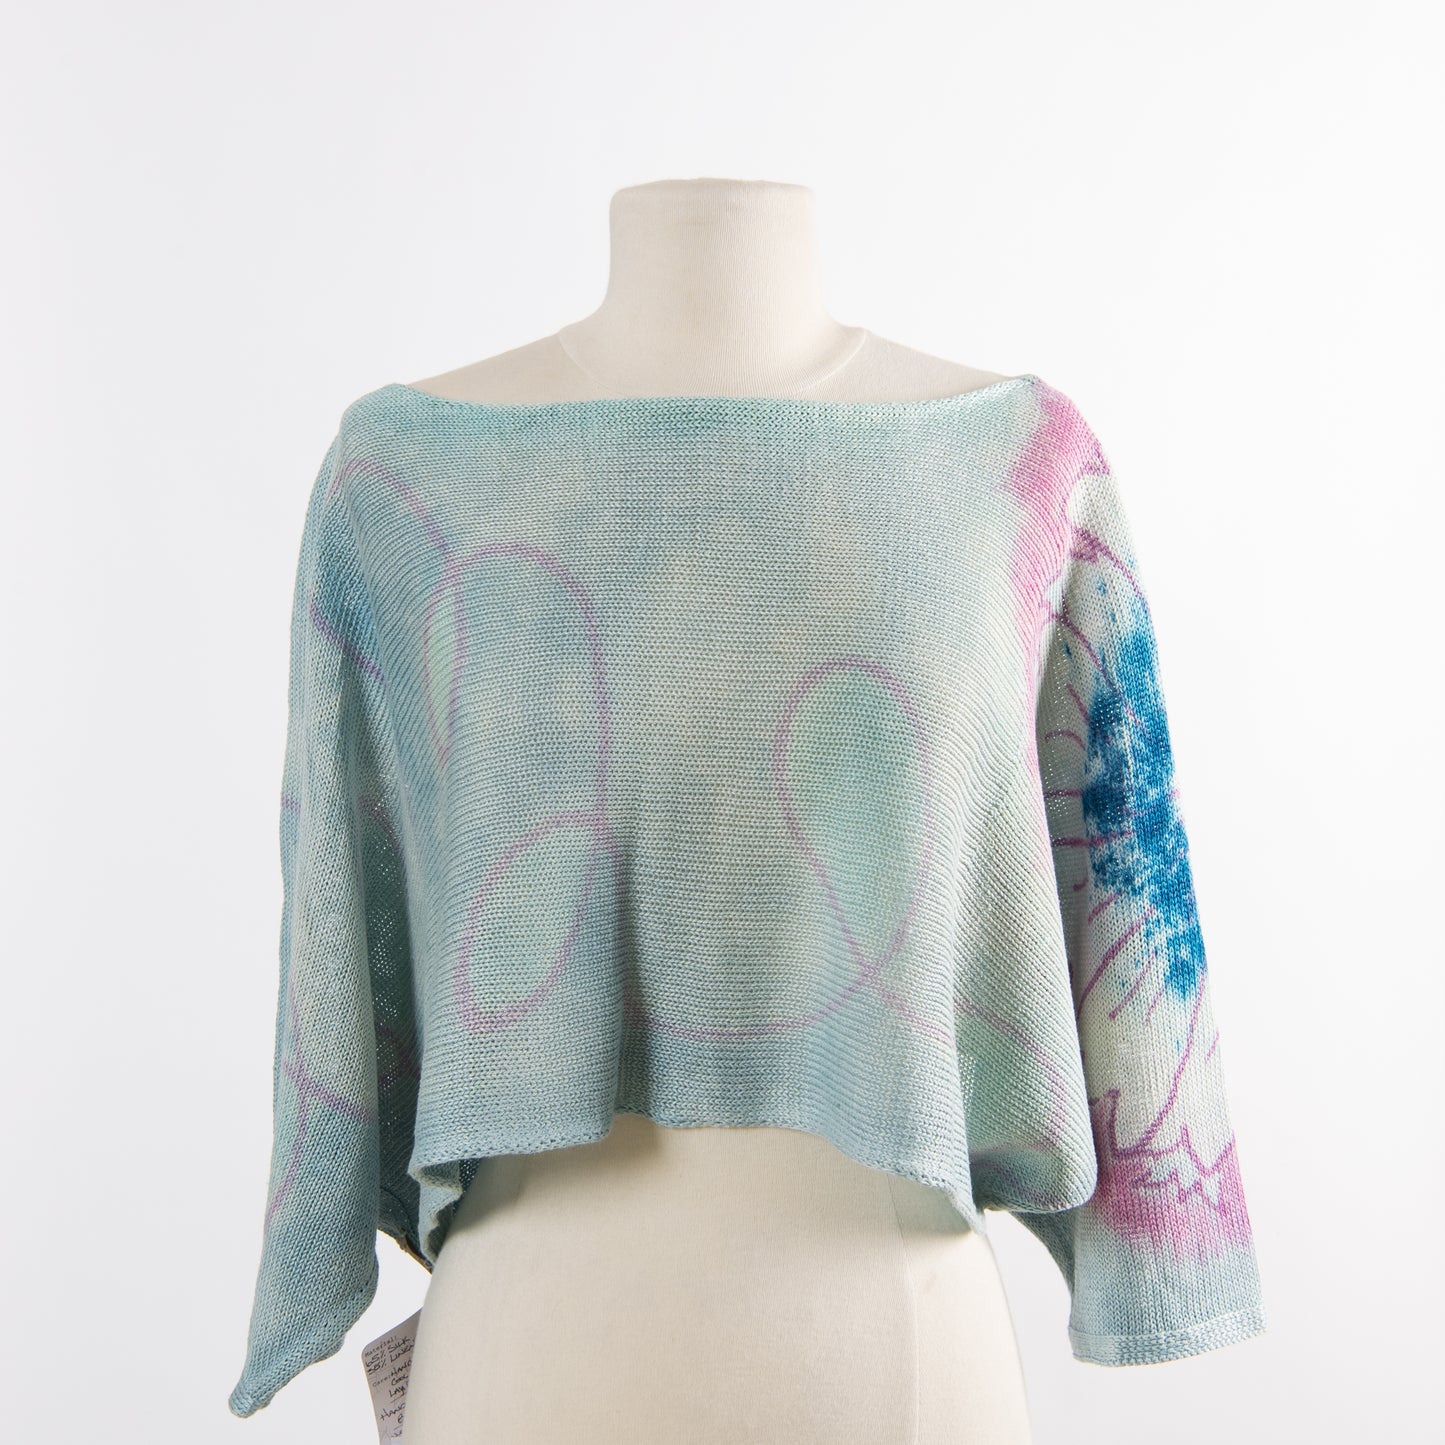 The Box Top - Hand Painted Sweater by Alison Gauthier